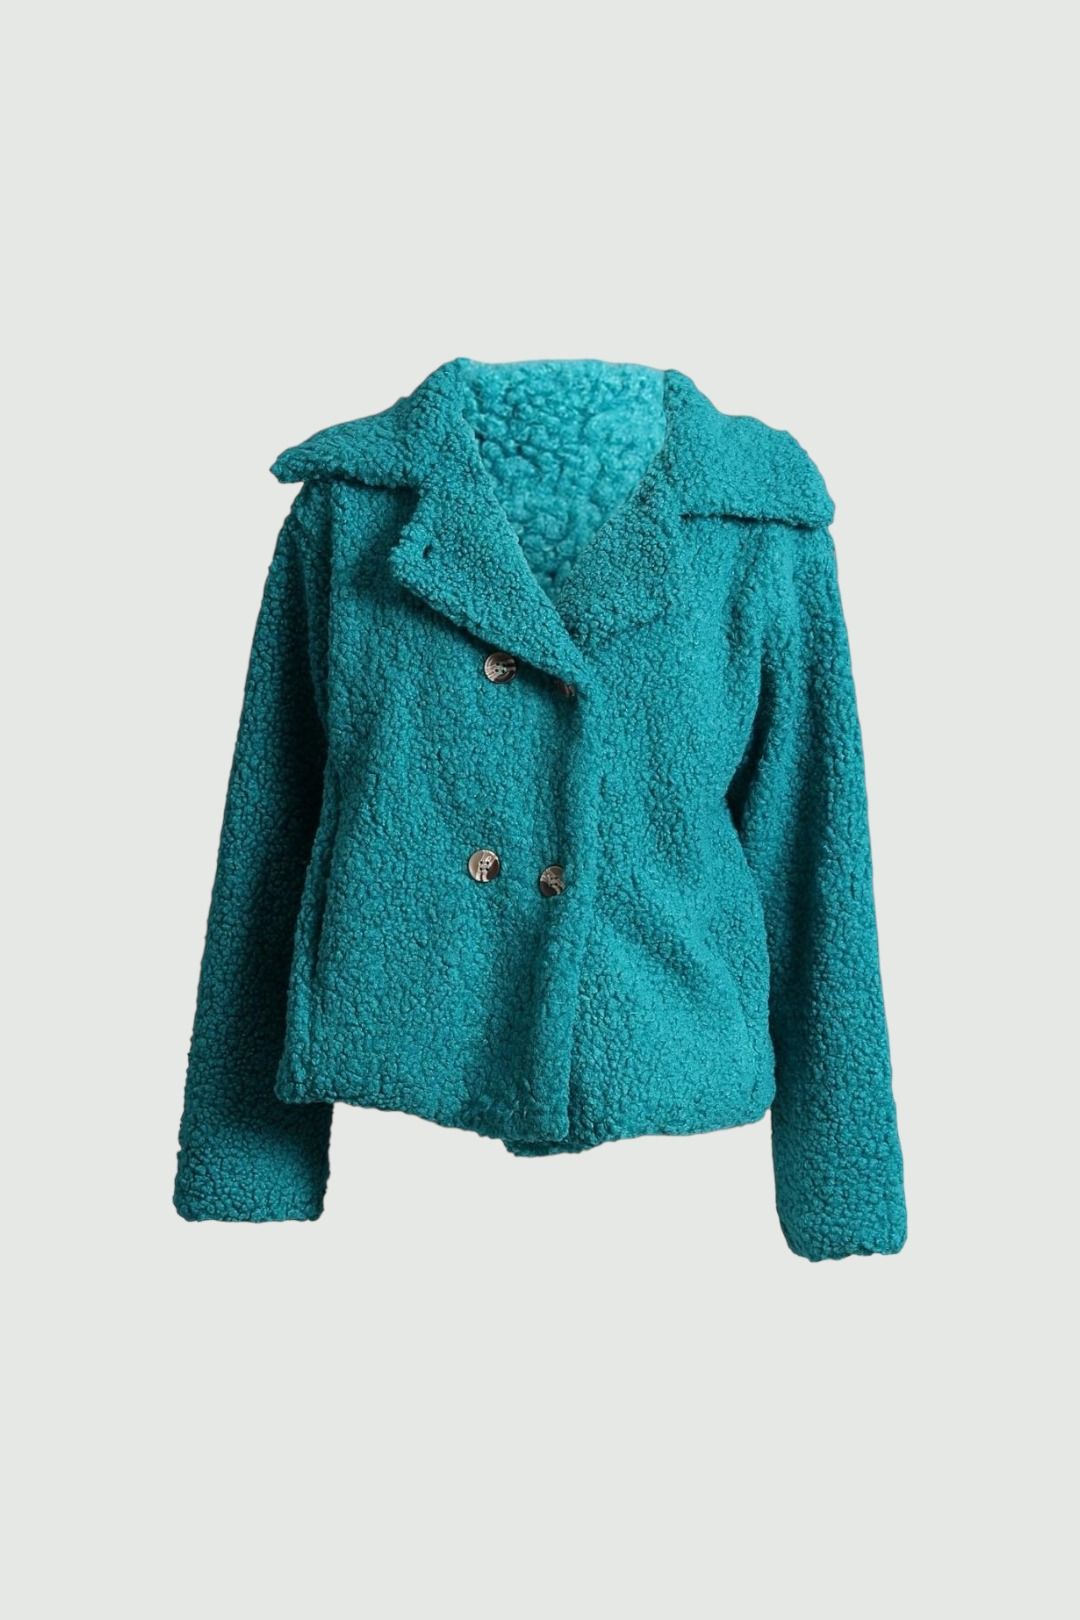 Emerge Teddy Double Breasted Jacket in Teal